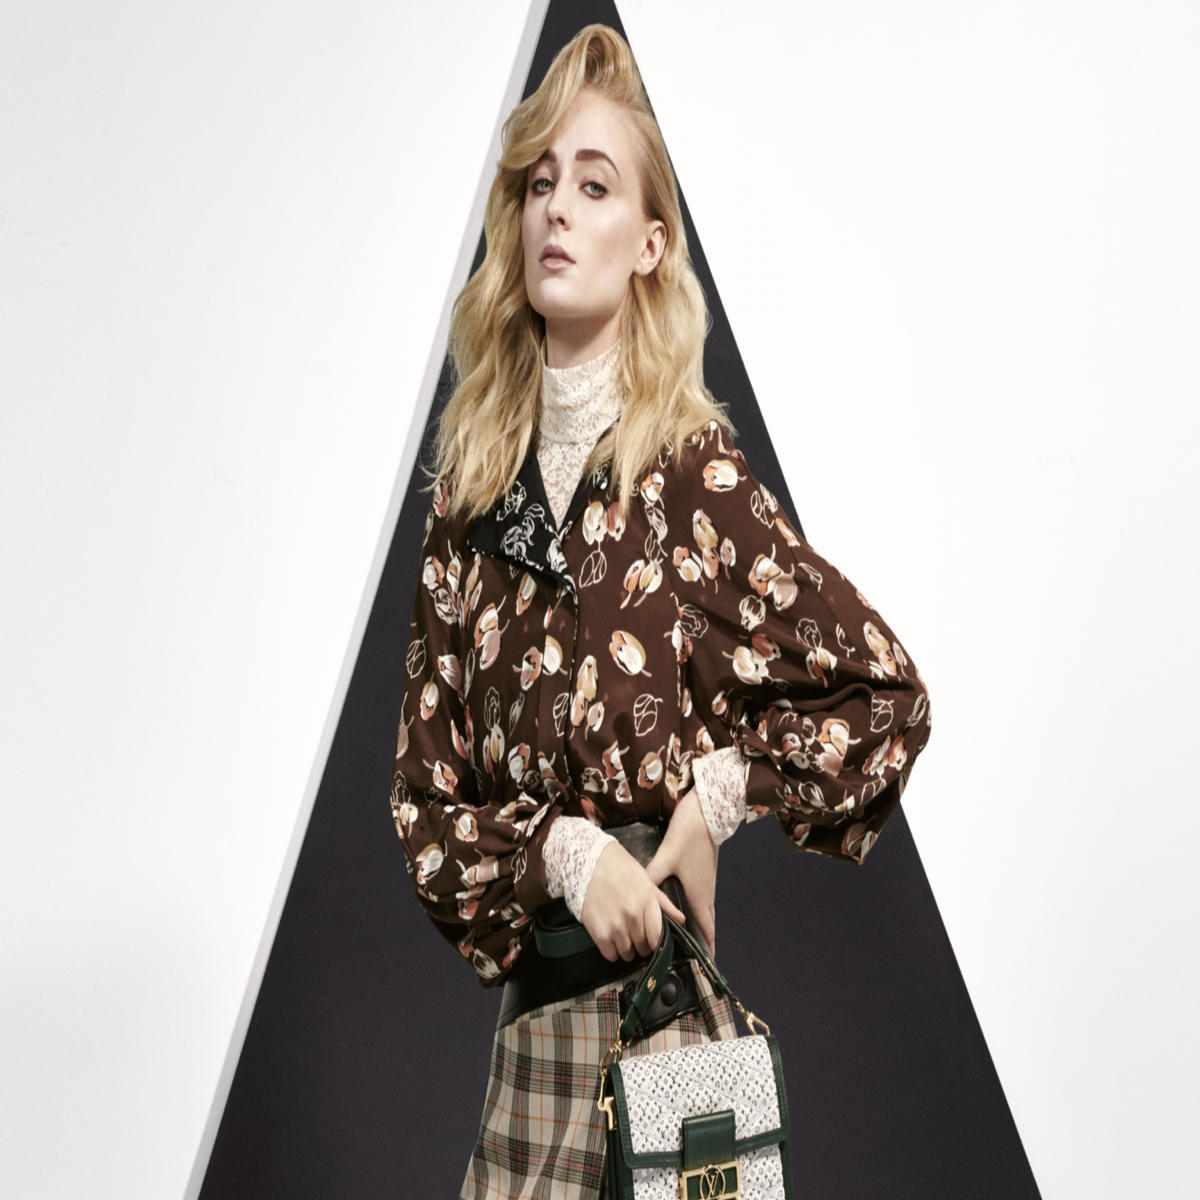 Chloe Grace Moretz is alluring in a new Louis Vuitton campaign inspired by  the countryside